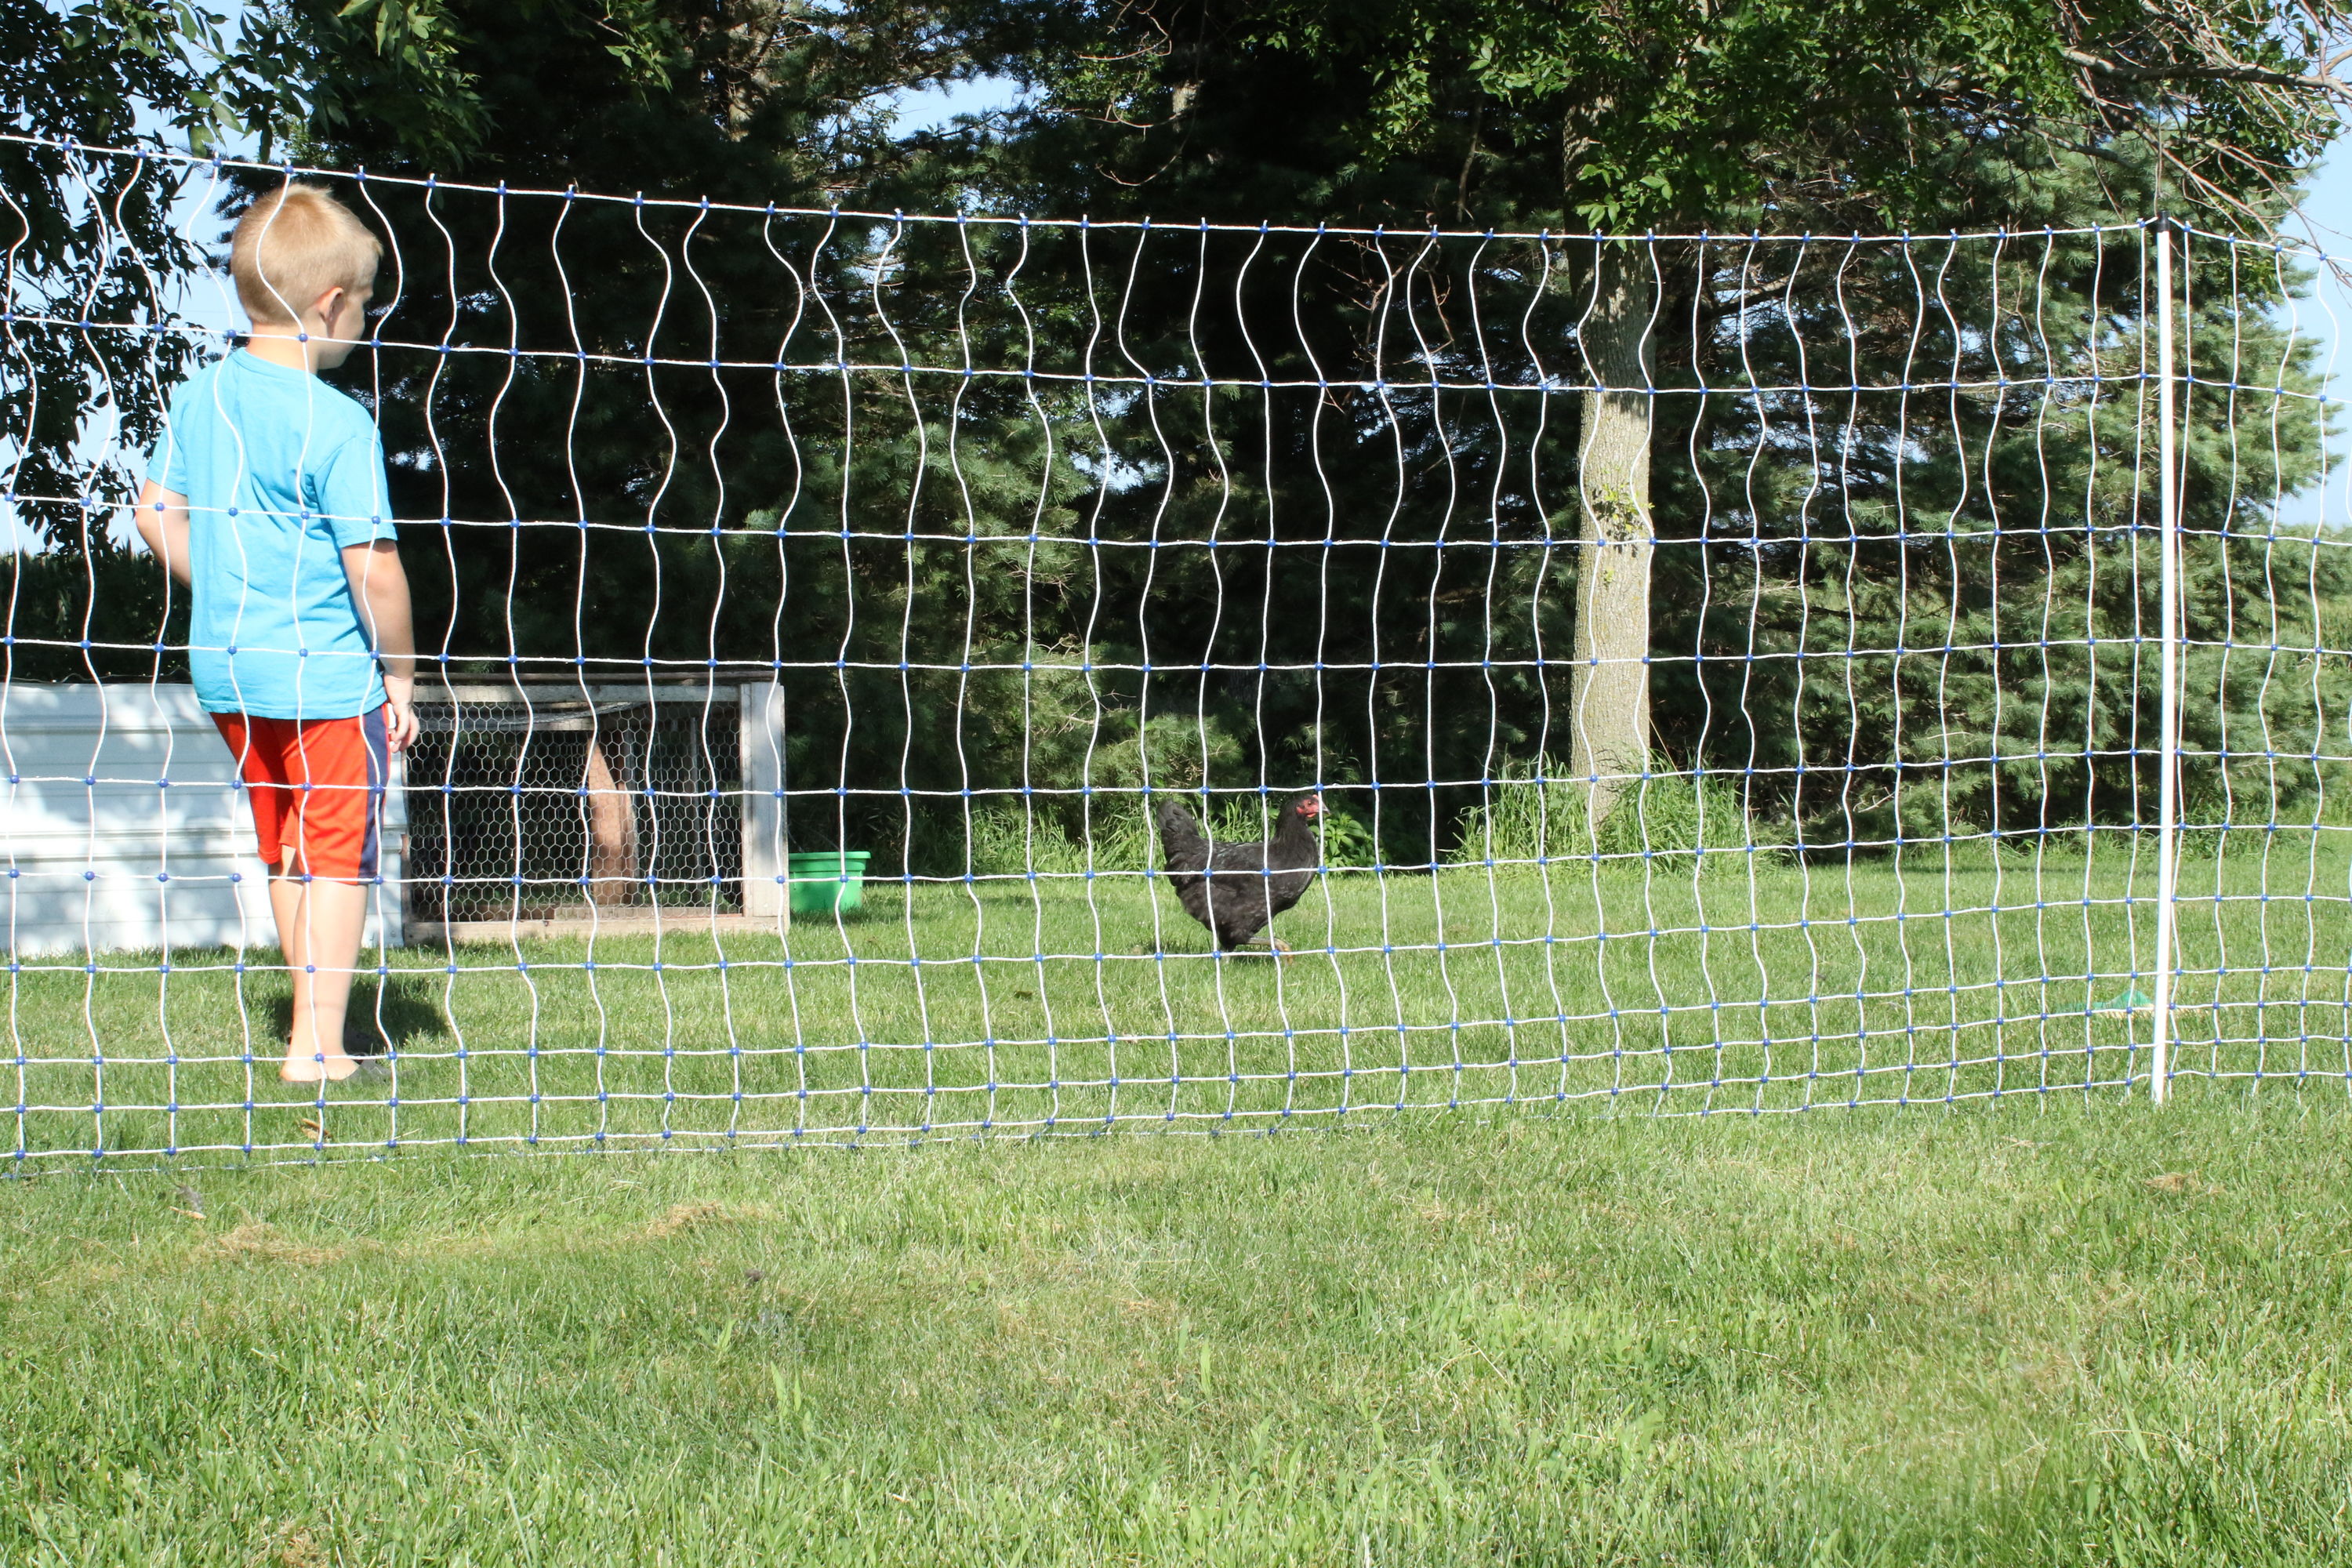 Starkline 164-ft-Gauge Electric Fence Poly Wire in the Electric Fence Wire  & Tape department at